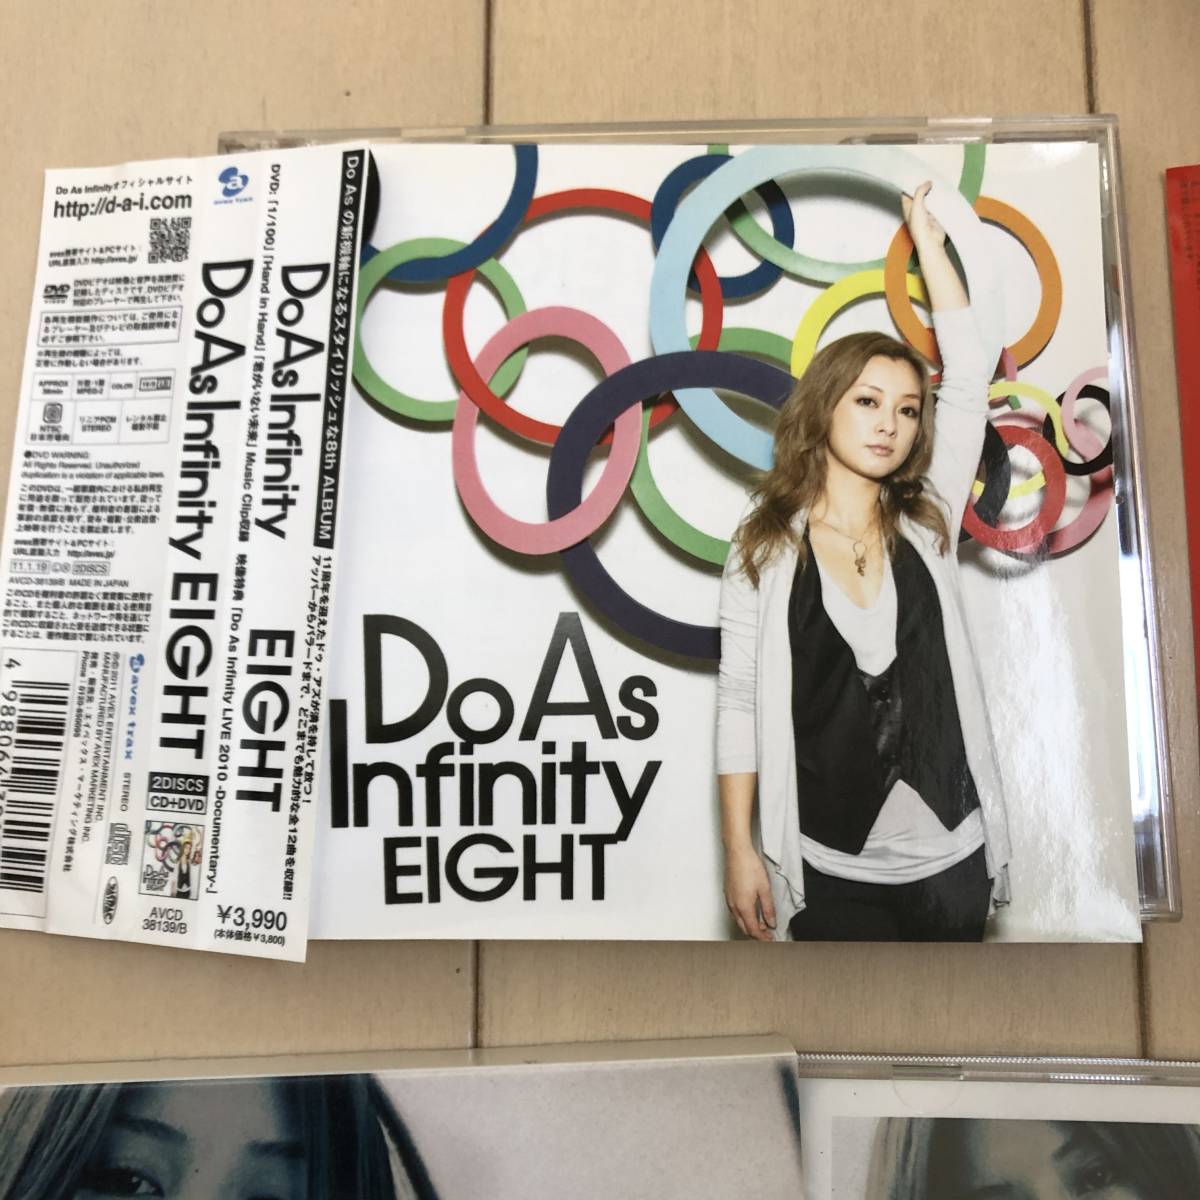 ▲Do As Infinity CD アルバム　6枚セット｜NEED YOUR LOVE/TRUE SONG｜/EIGHT/DEEP FOREST/BREAK OF DAWN/DO THE LIVE▲_画像2